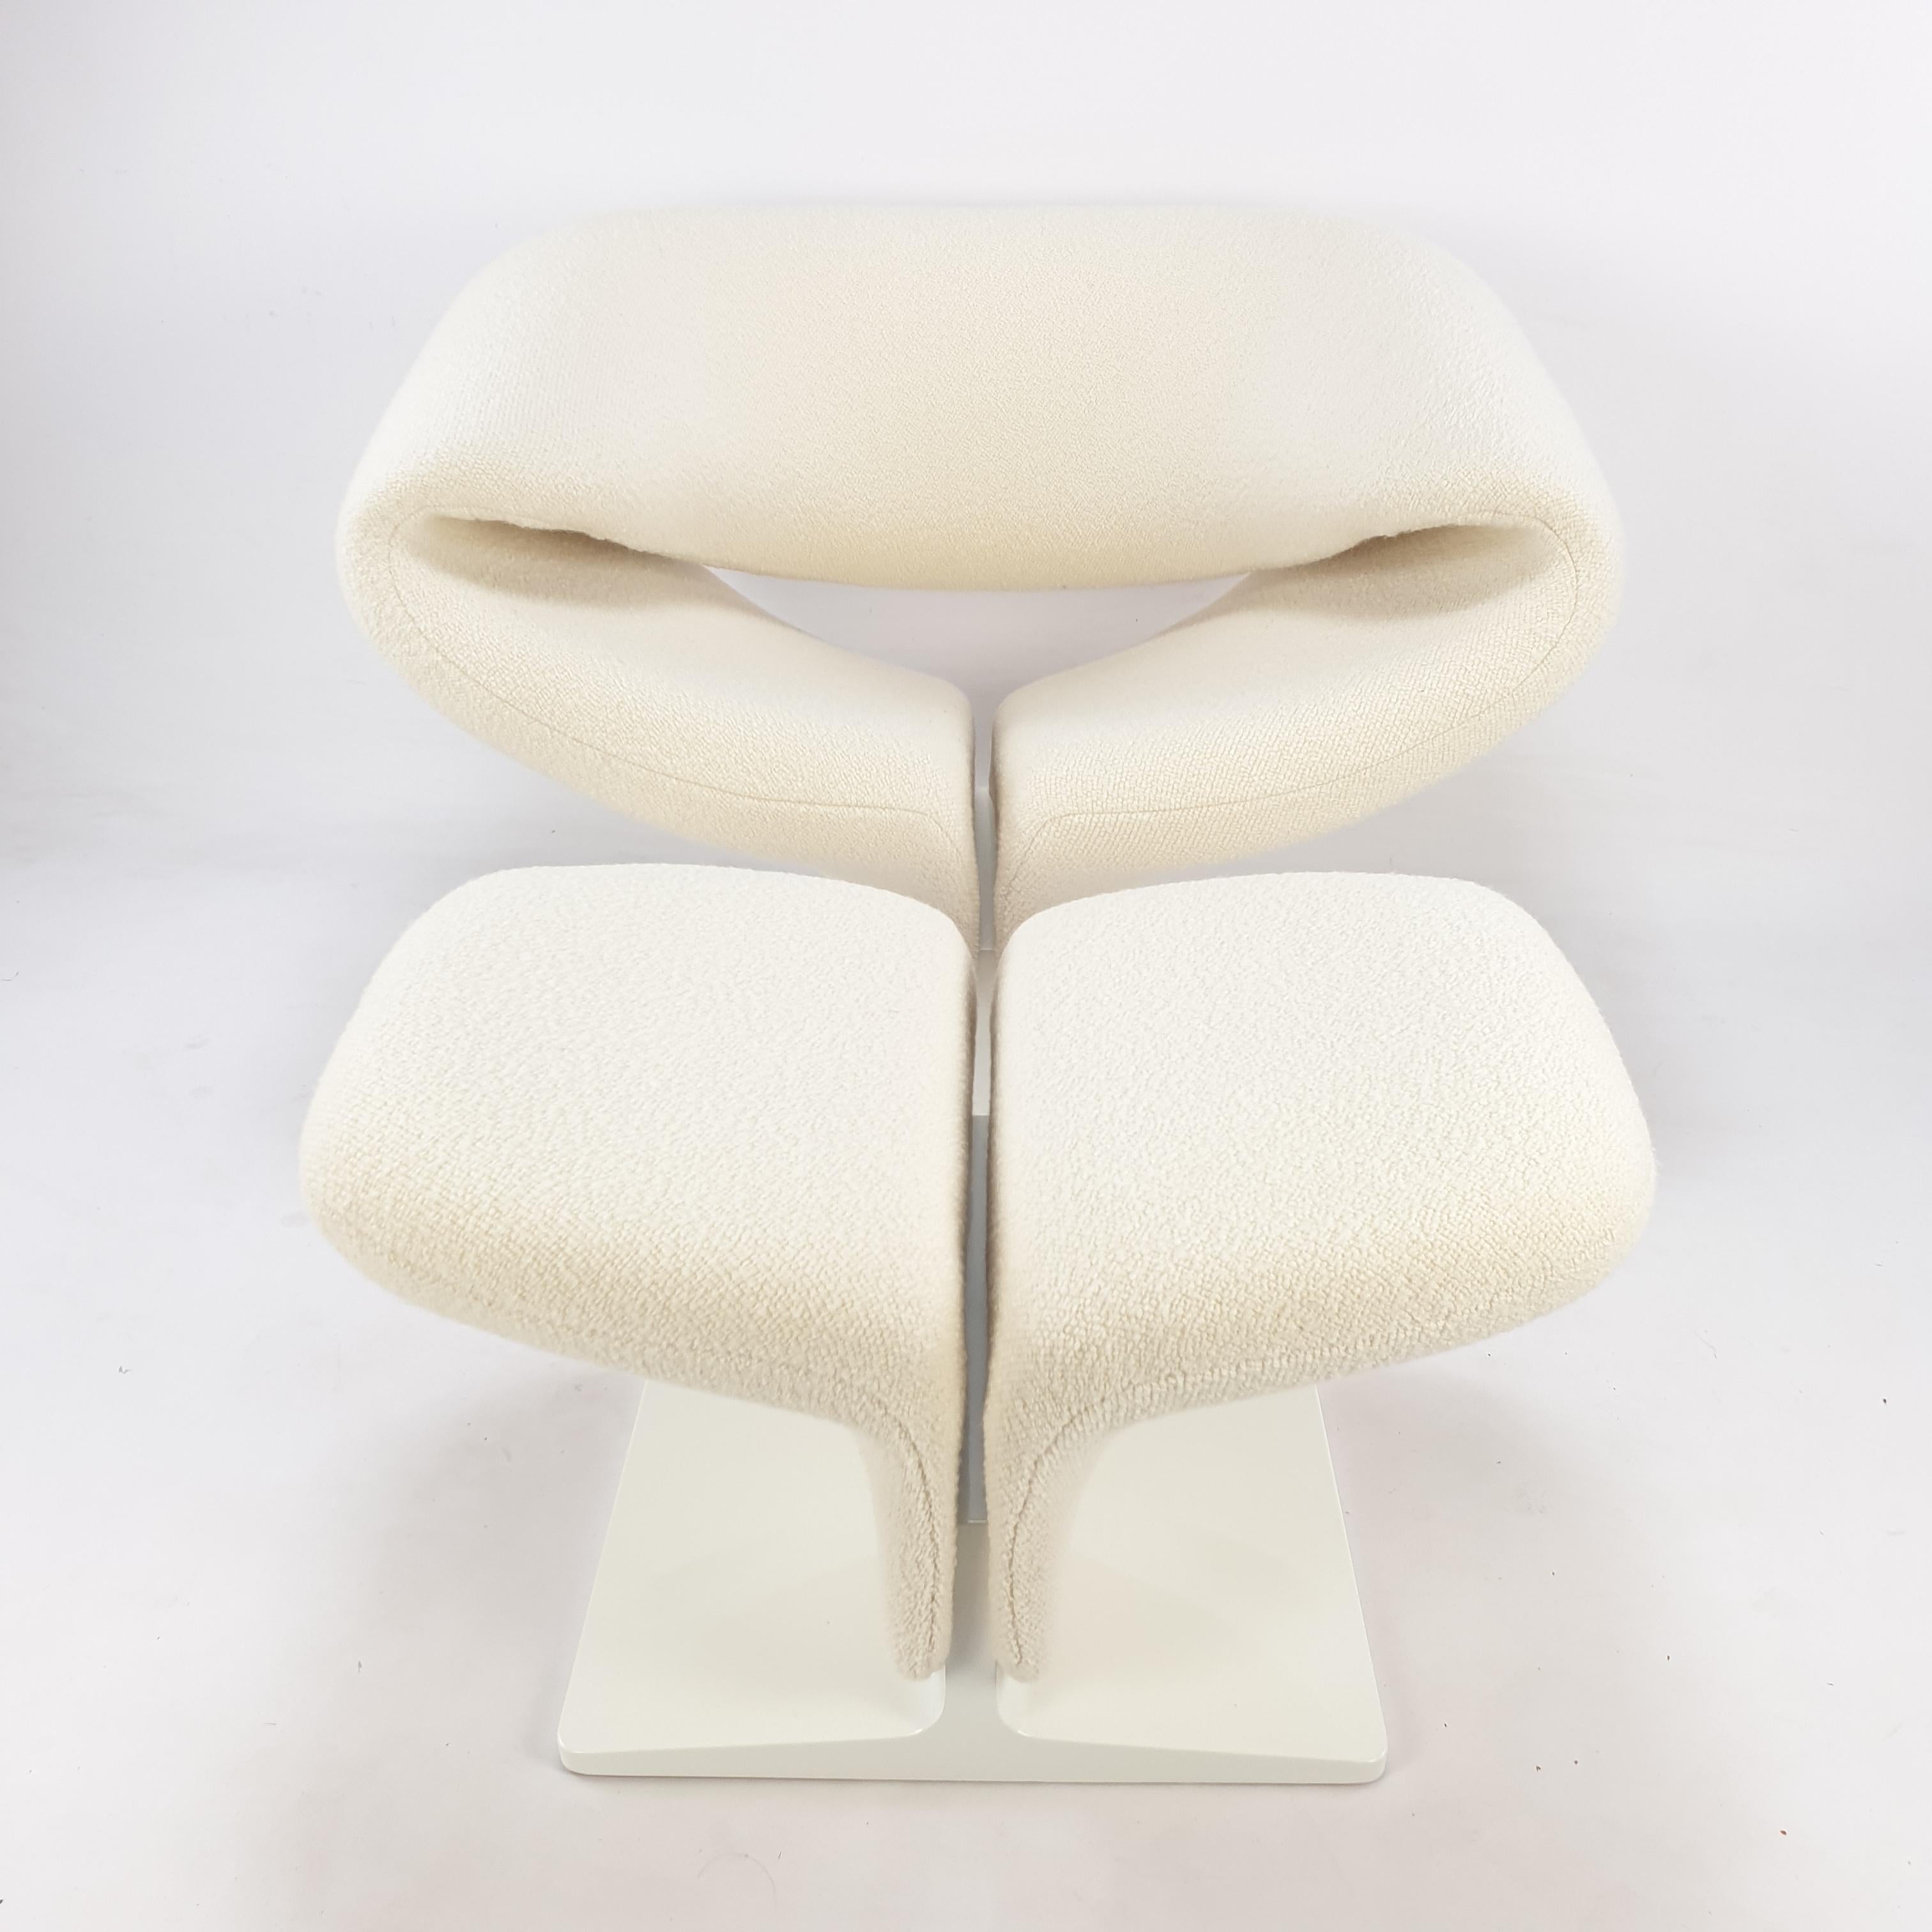 Amazing and very comfortable Ribbon Chair with Ottoman, designed by the French designer Pierre Paulin in the 60's and produced by Artifort. This is a early edition. The chair and ottoman are completely restored by a French Pierre Paulin specialist.